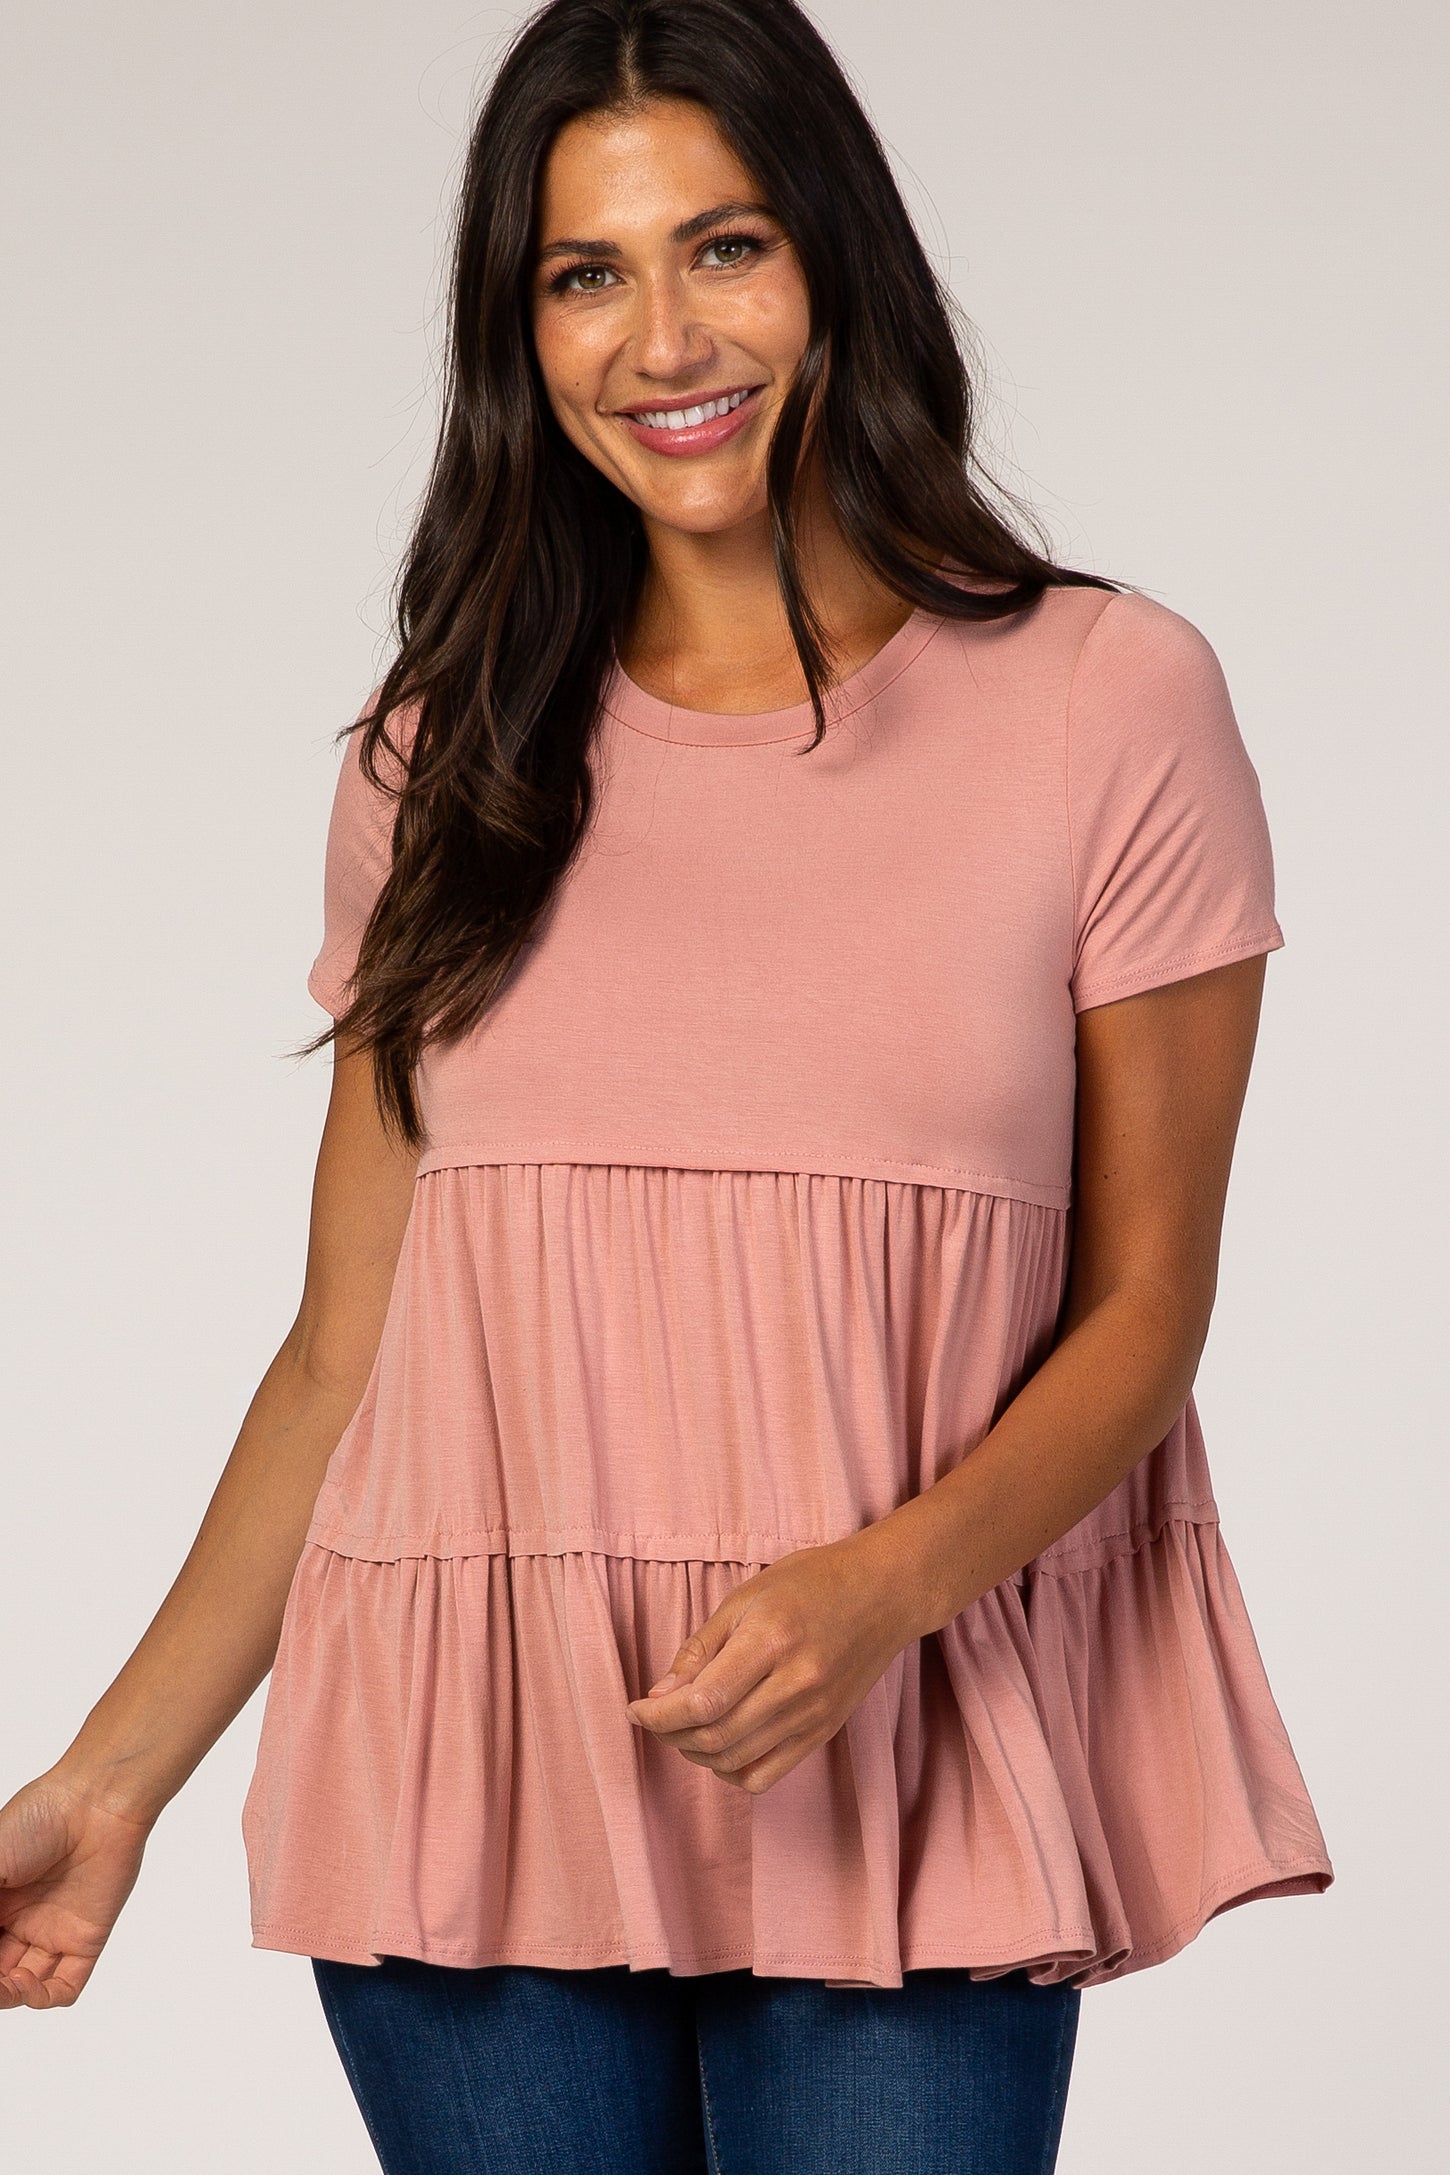 Pink Tiered Maternity Top